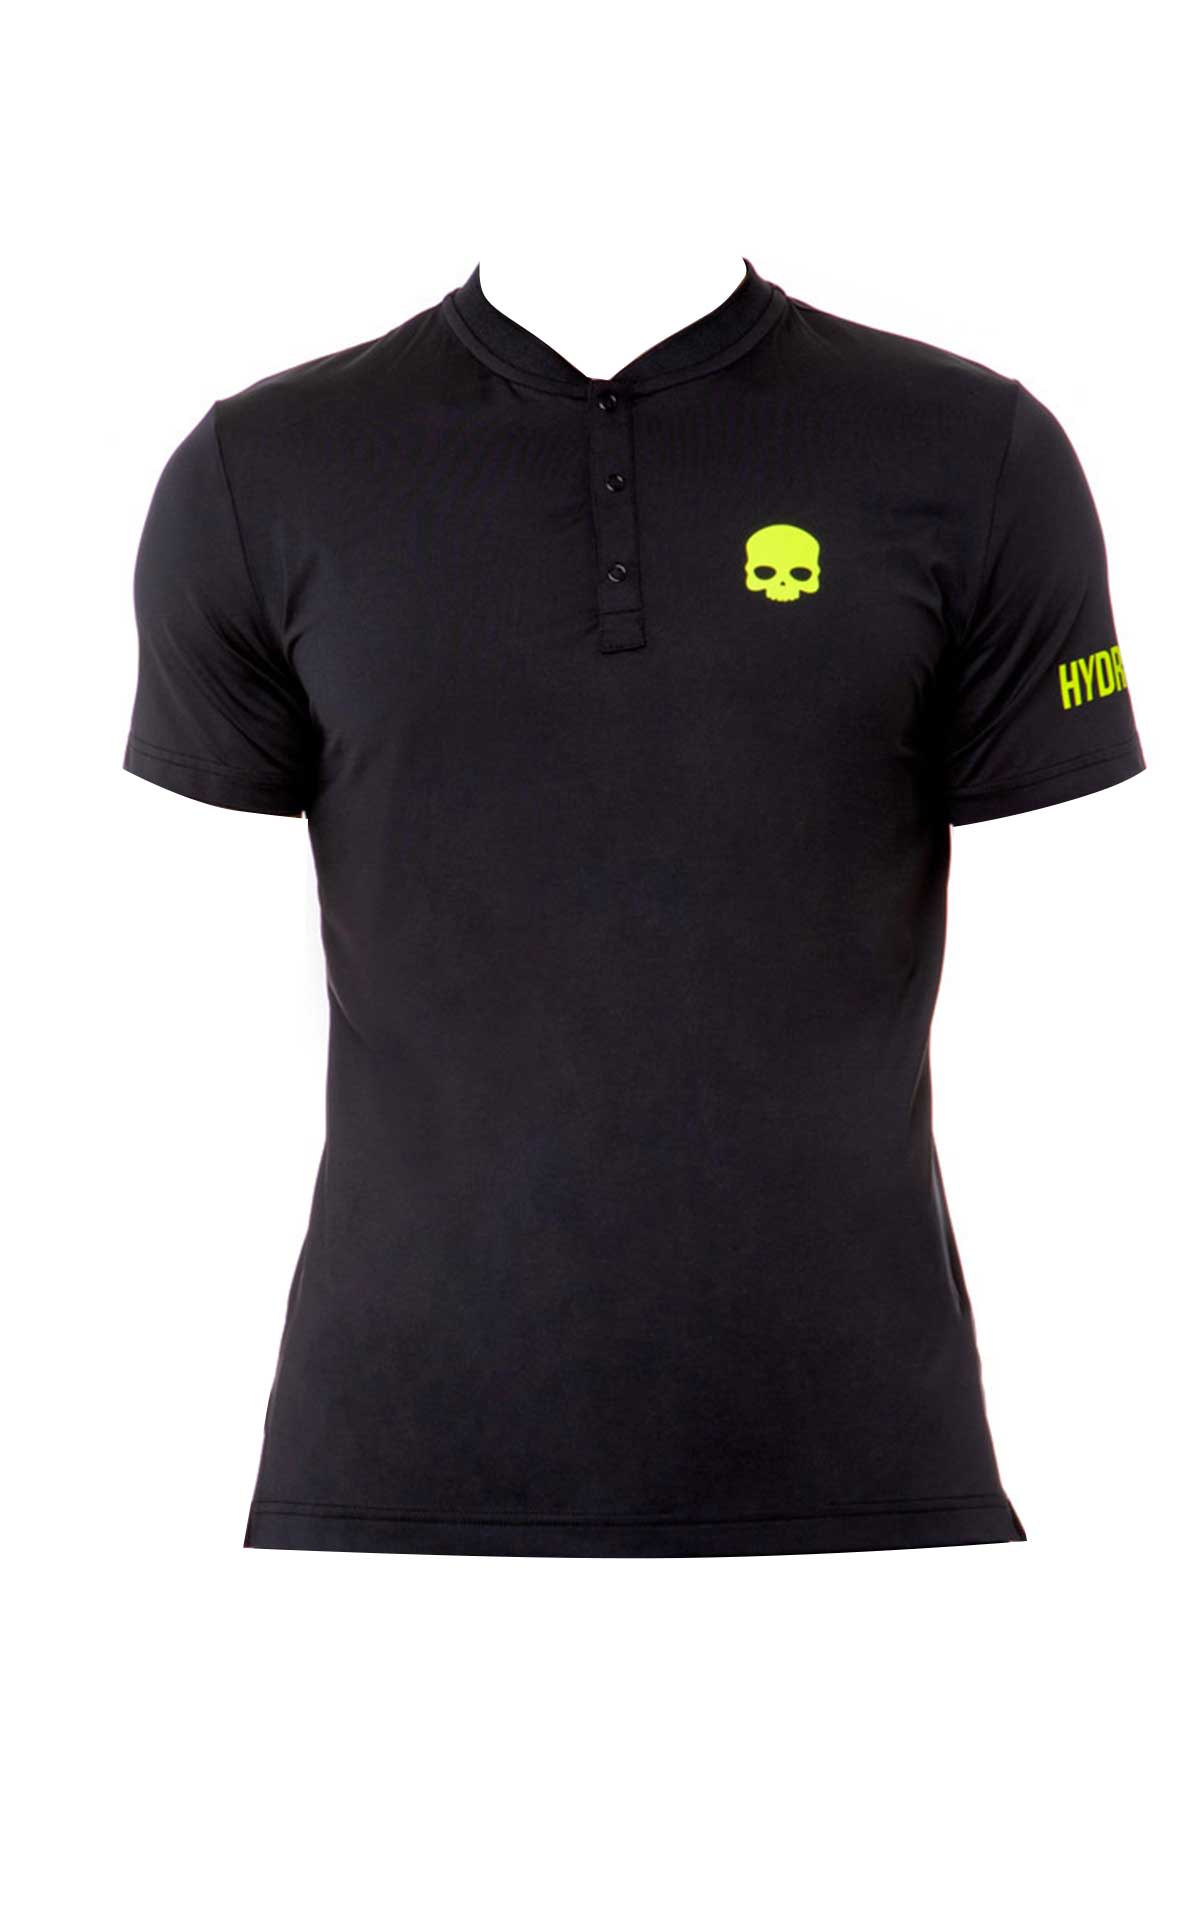 Hydrogen Black t-shirt with reflective skull